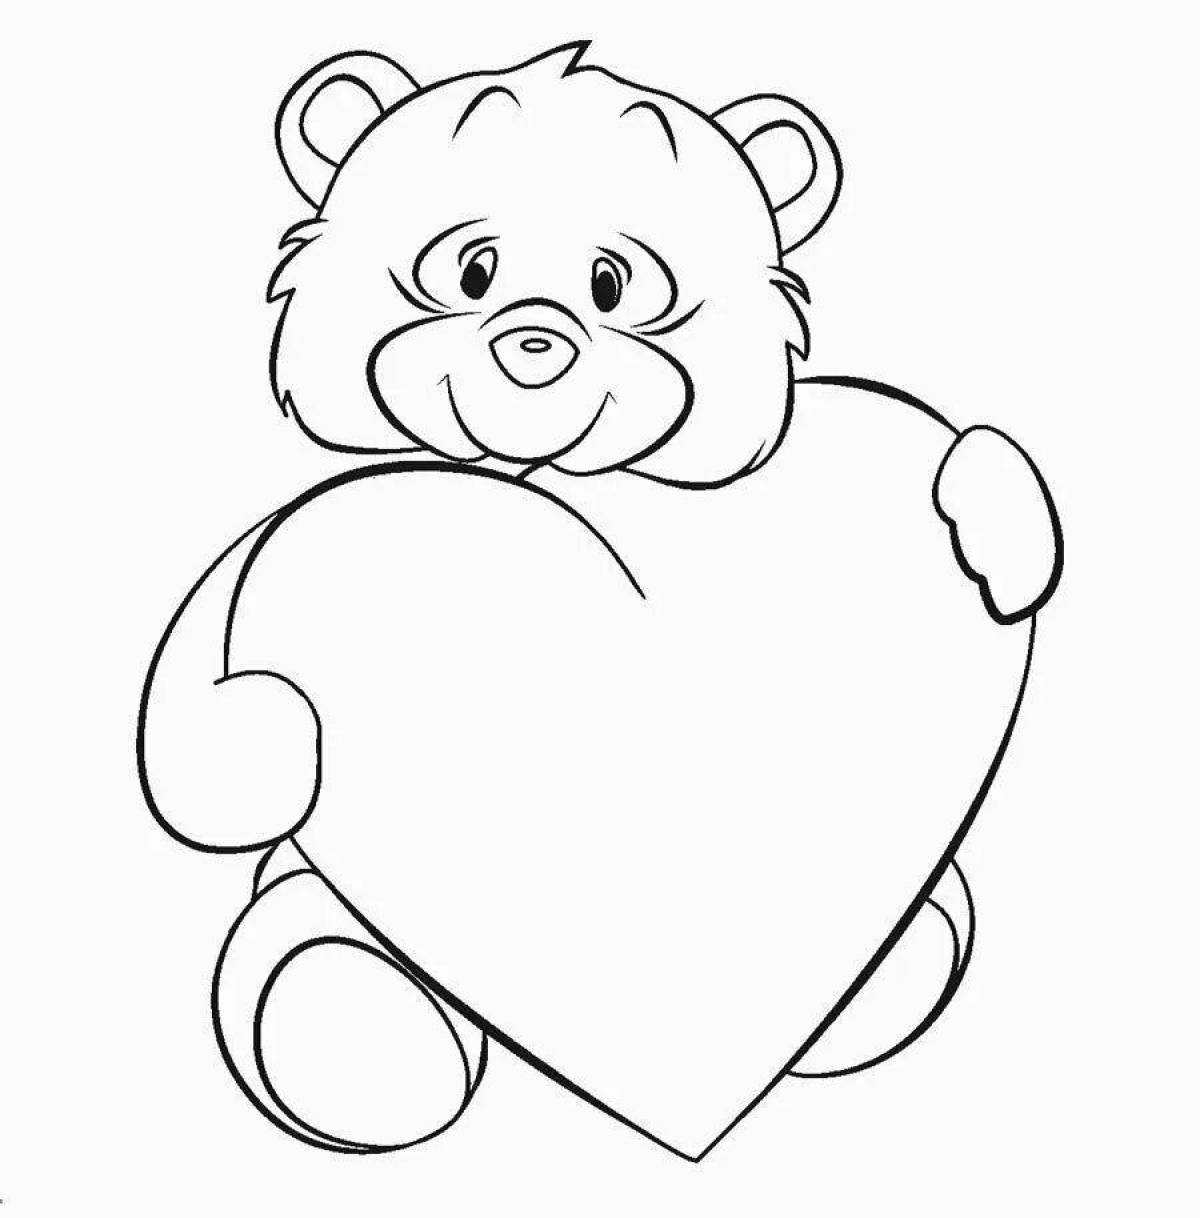 Coloring book brave teddy bear with a heart